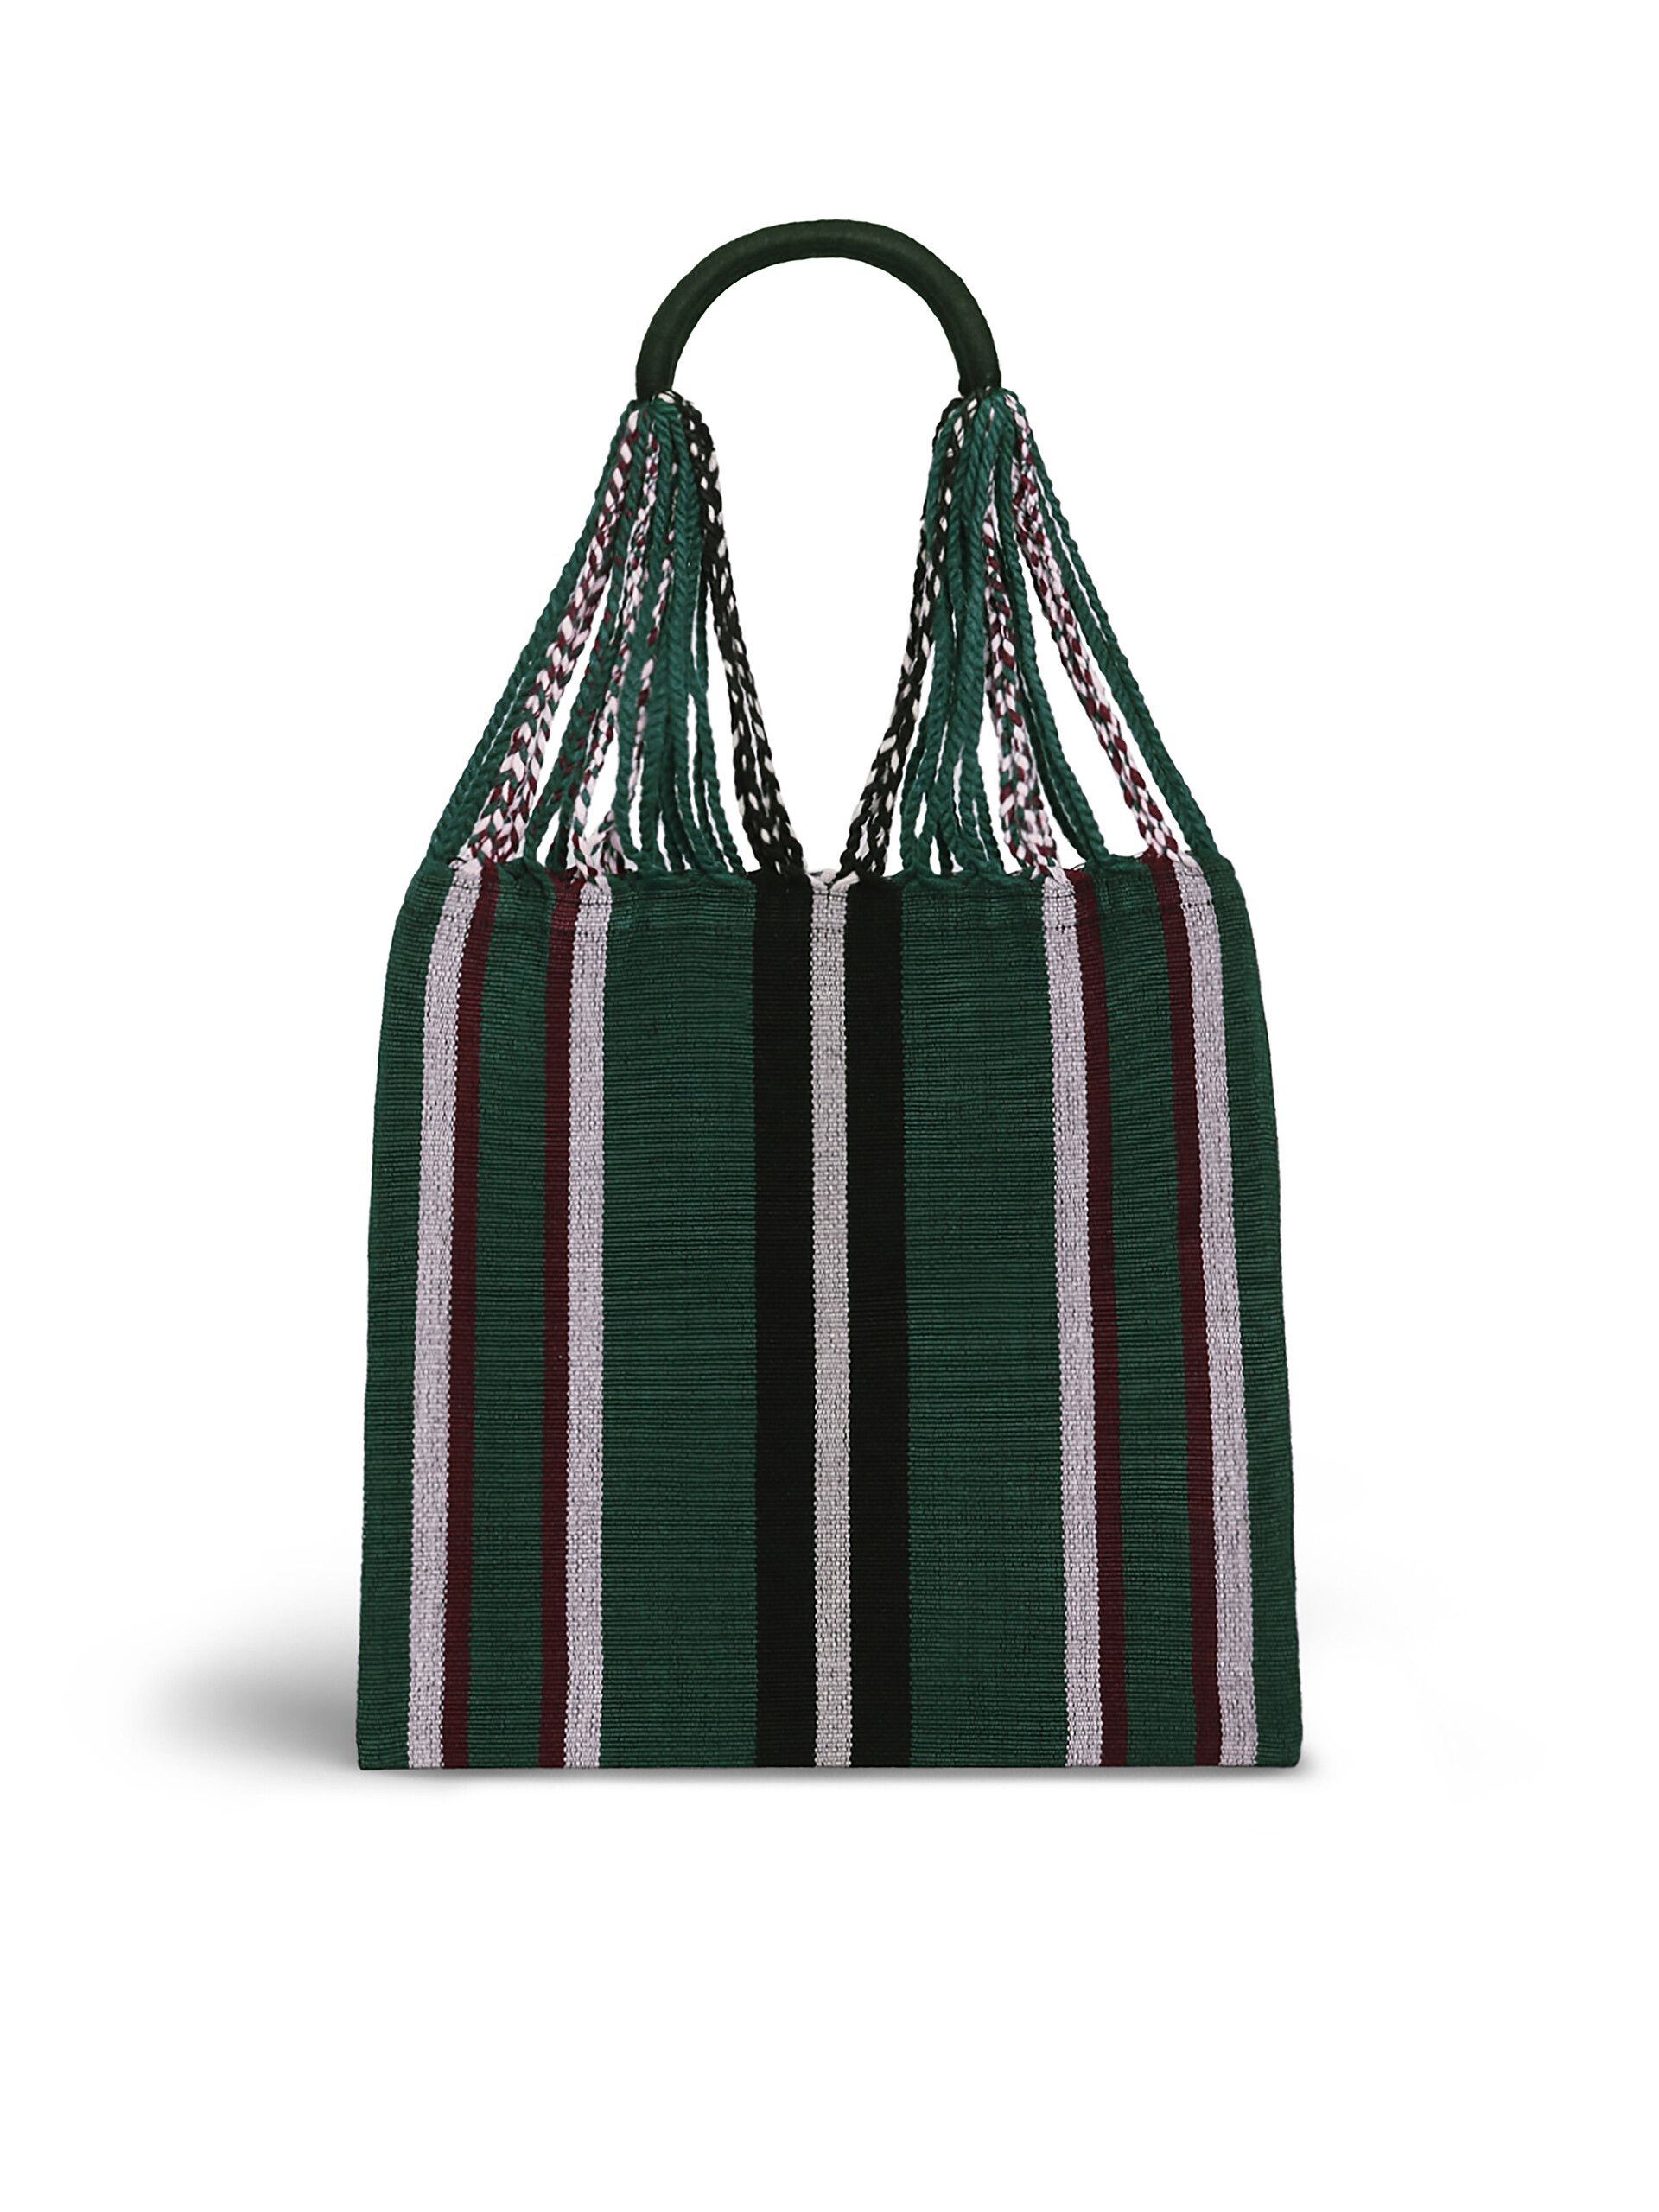 MARNI MARKET shopping bag in polyester with hammock-like handle grey turquoise and red - Bags - Image 3